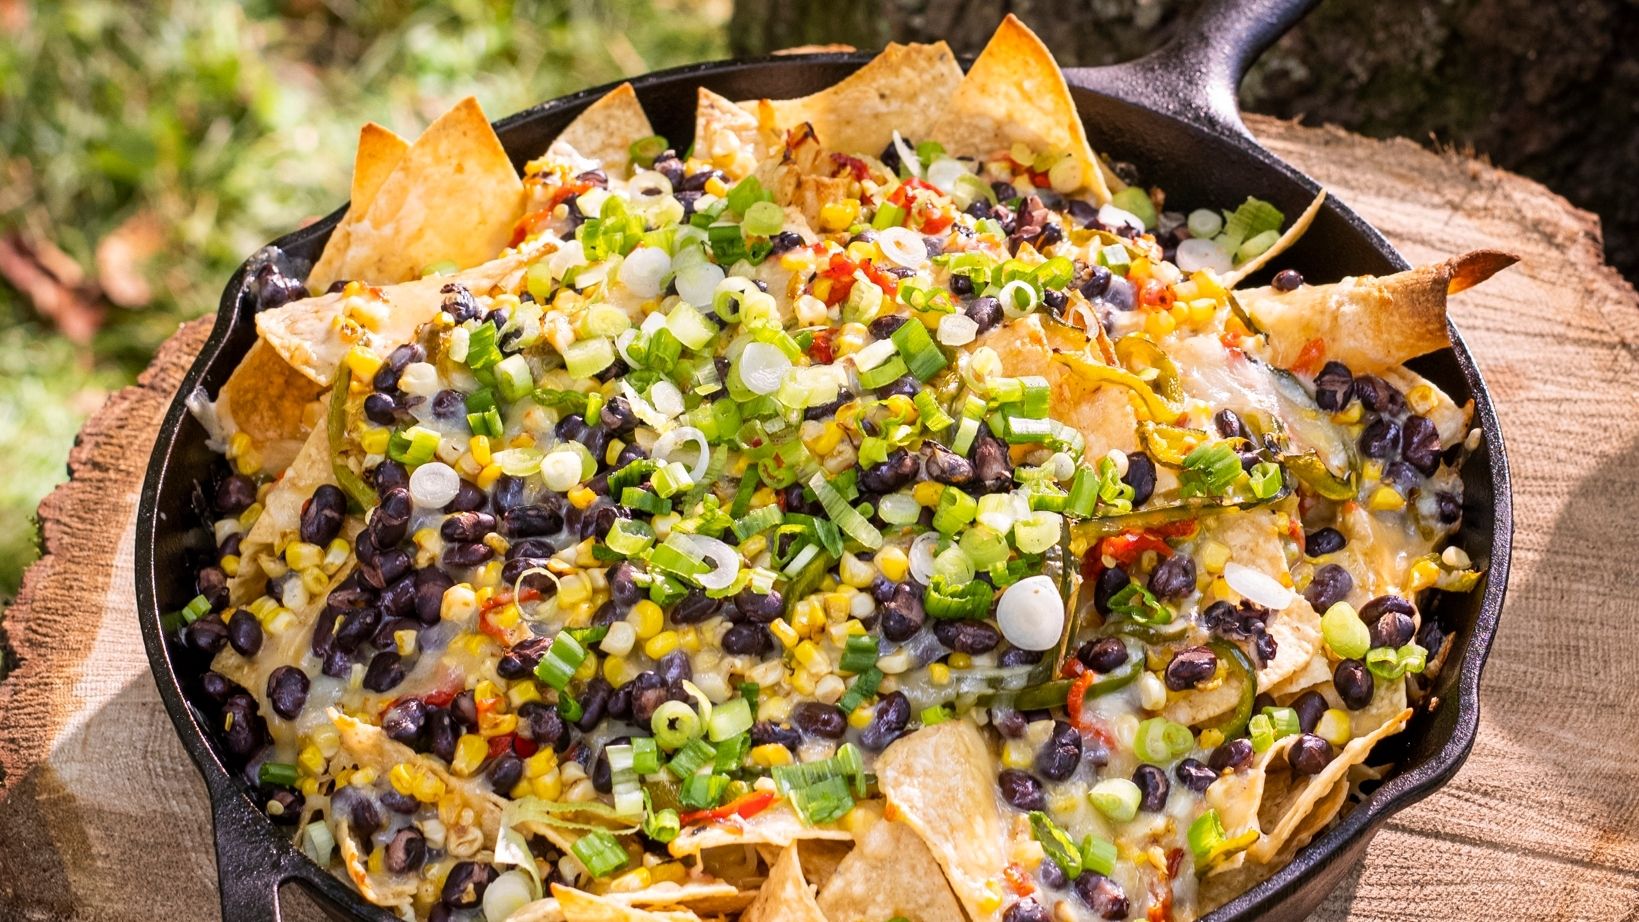 This cheesy, smoky plate of nachos will brighten up any cookout